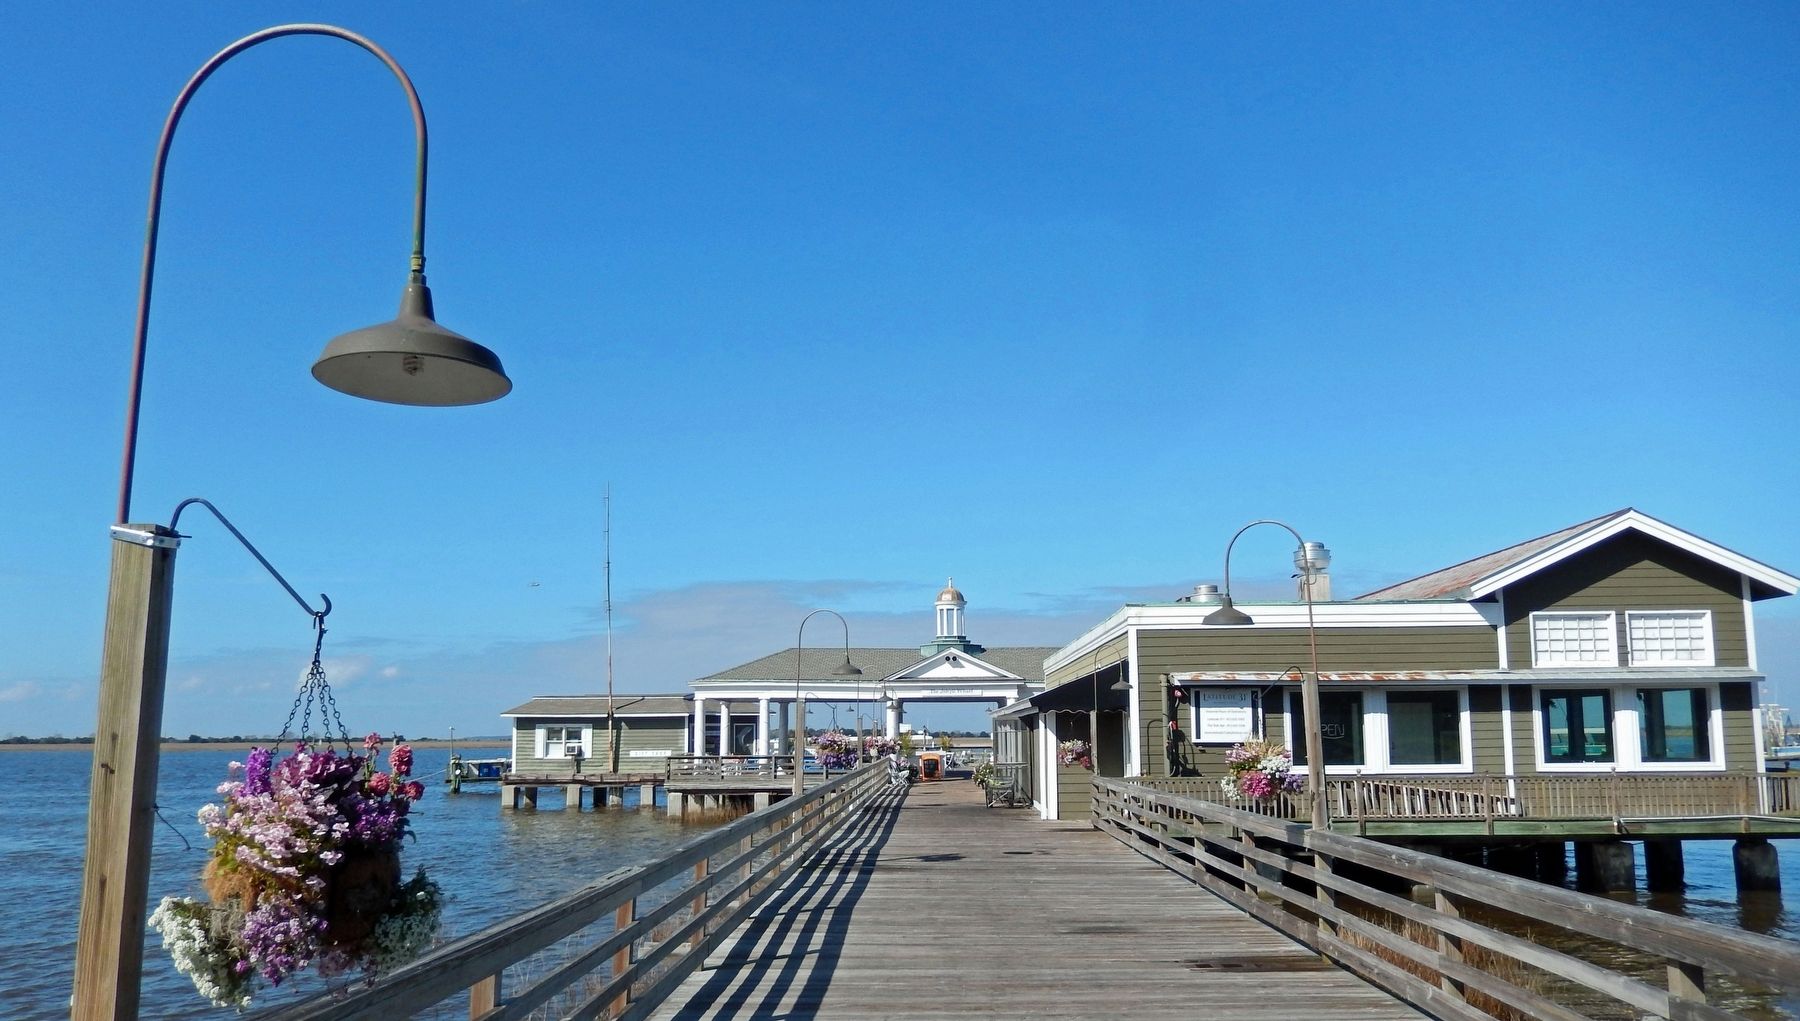 Jekyll Island Pier & Wharf image. Click for full size.